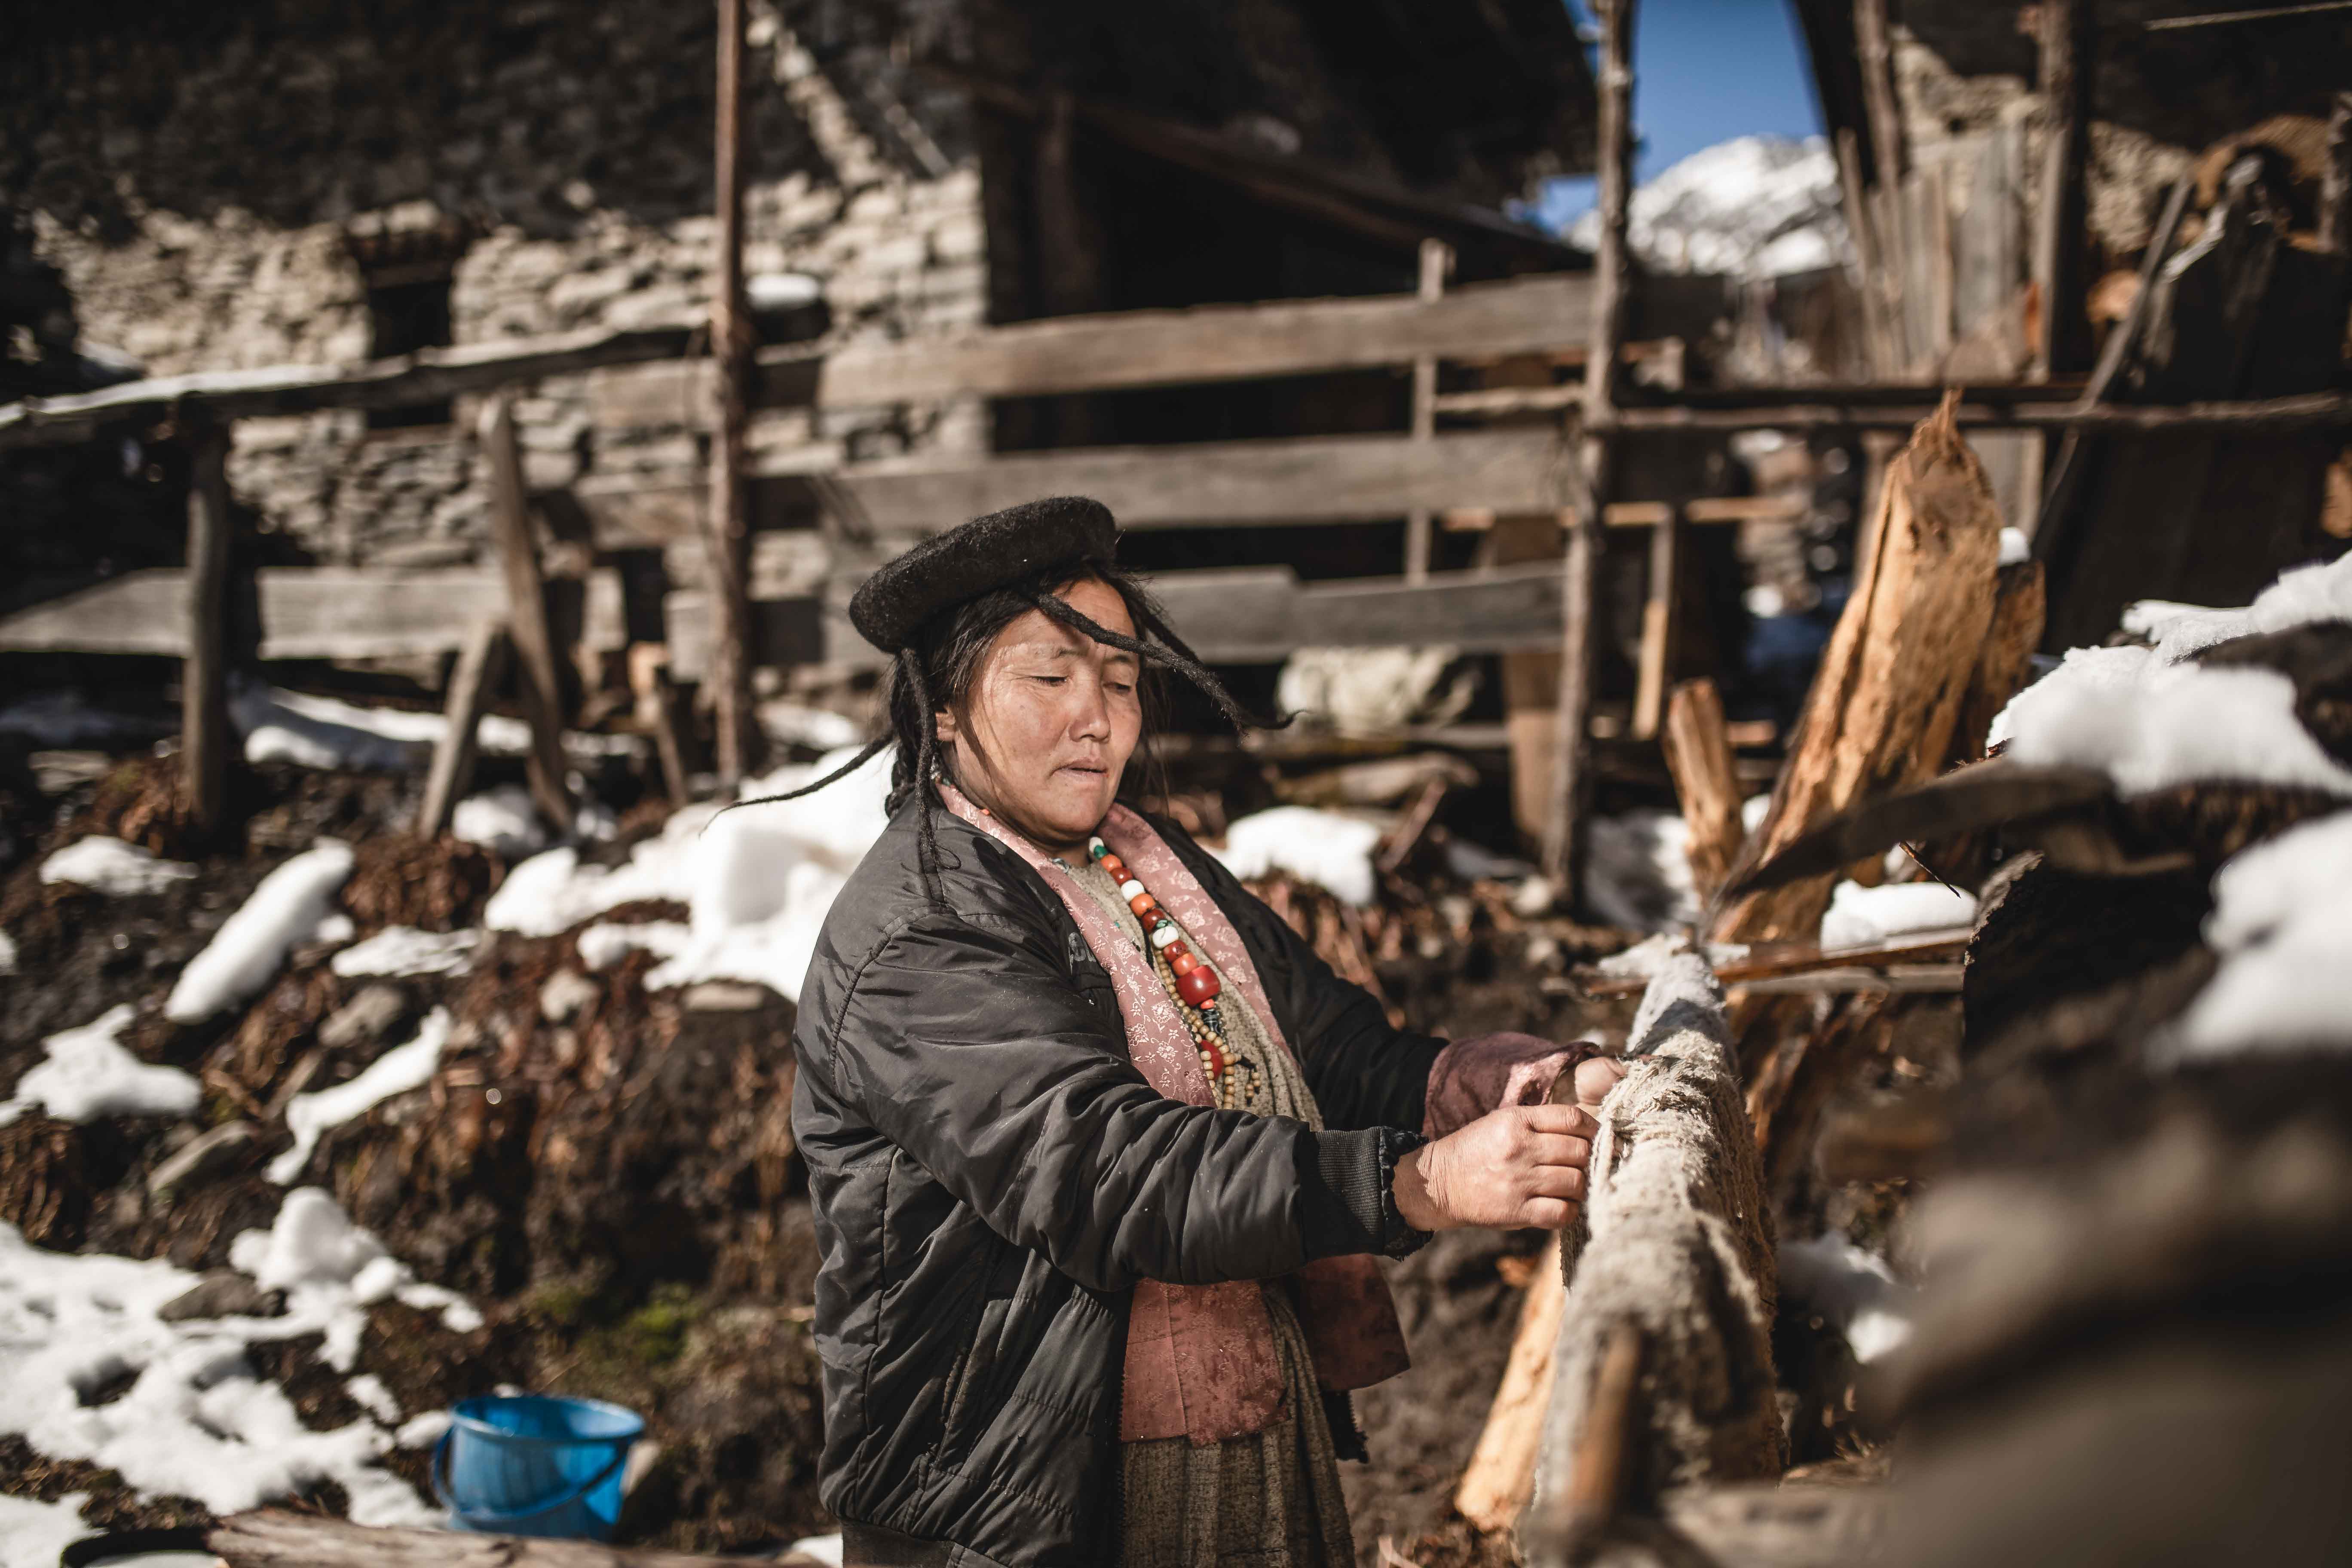 Street photography of a Brokpa tribeswoman working in the village